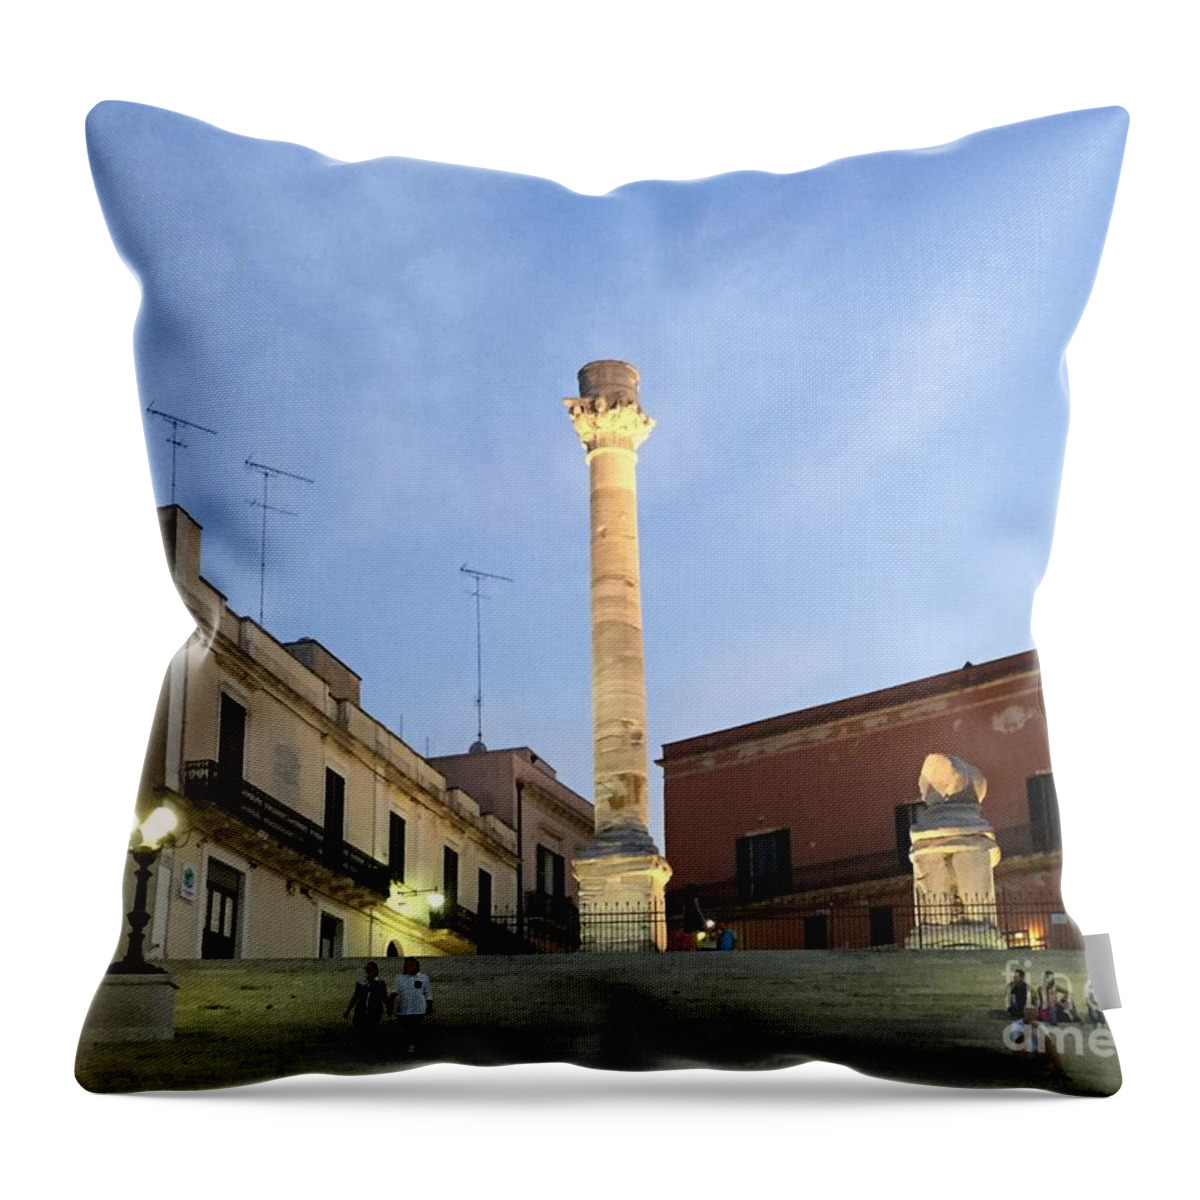 Cityscape Throw Pillow featuring the photograph Brindisi Colonne Appian Way 2 by Italian Art